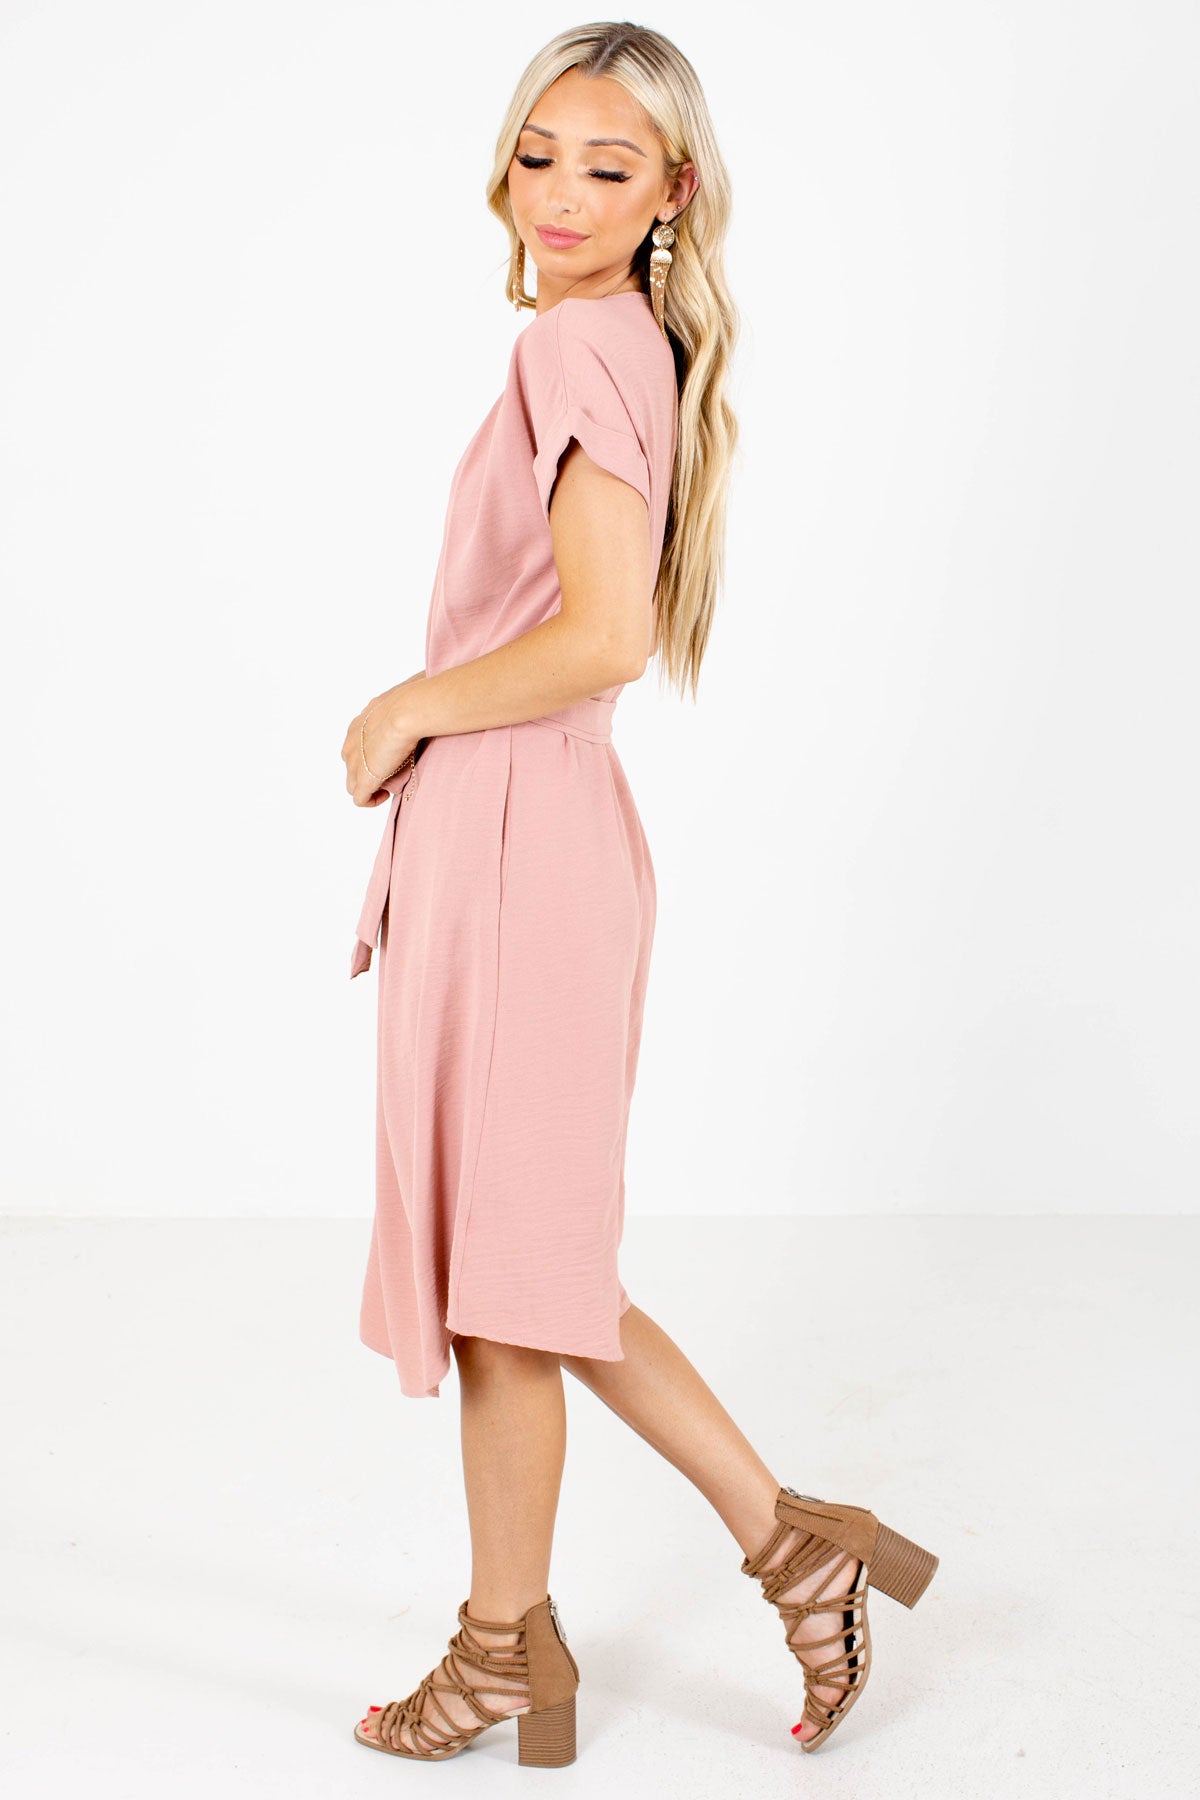 Mauve Cuffed Sleeve Boutique Dresses for Women